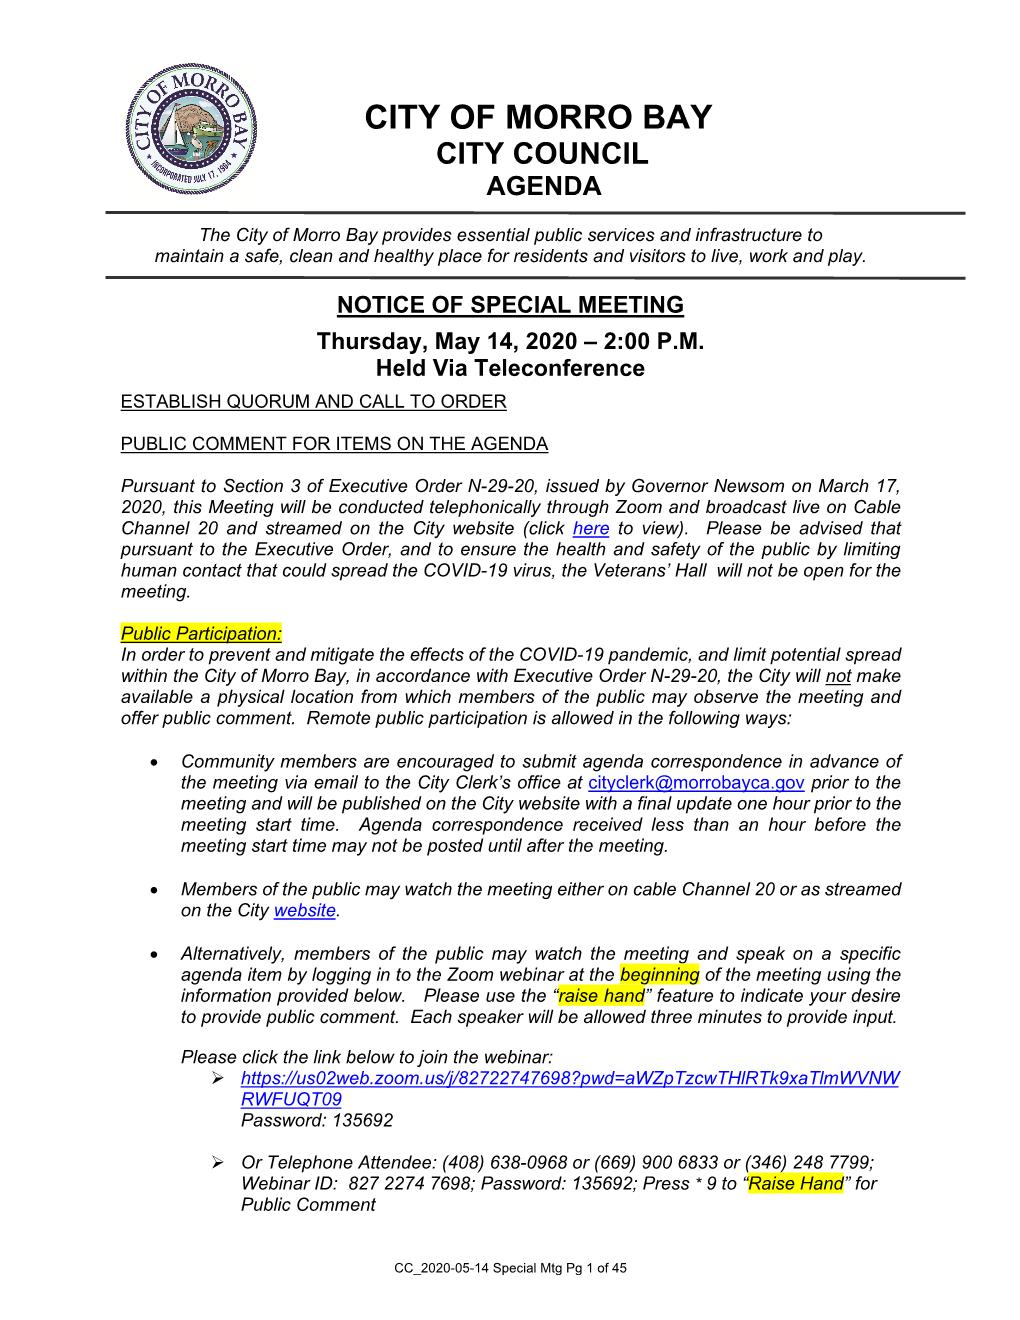 05/14/20 City Council Special Meeting